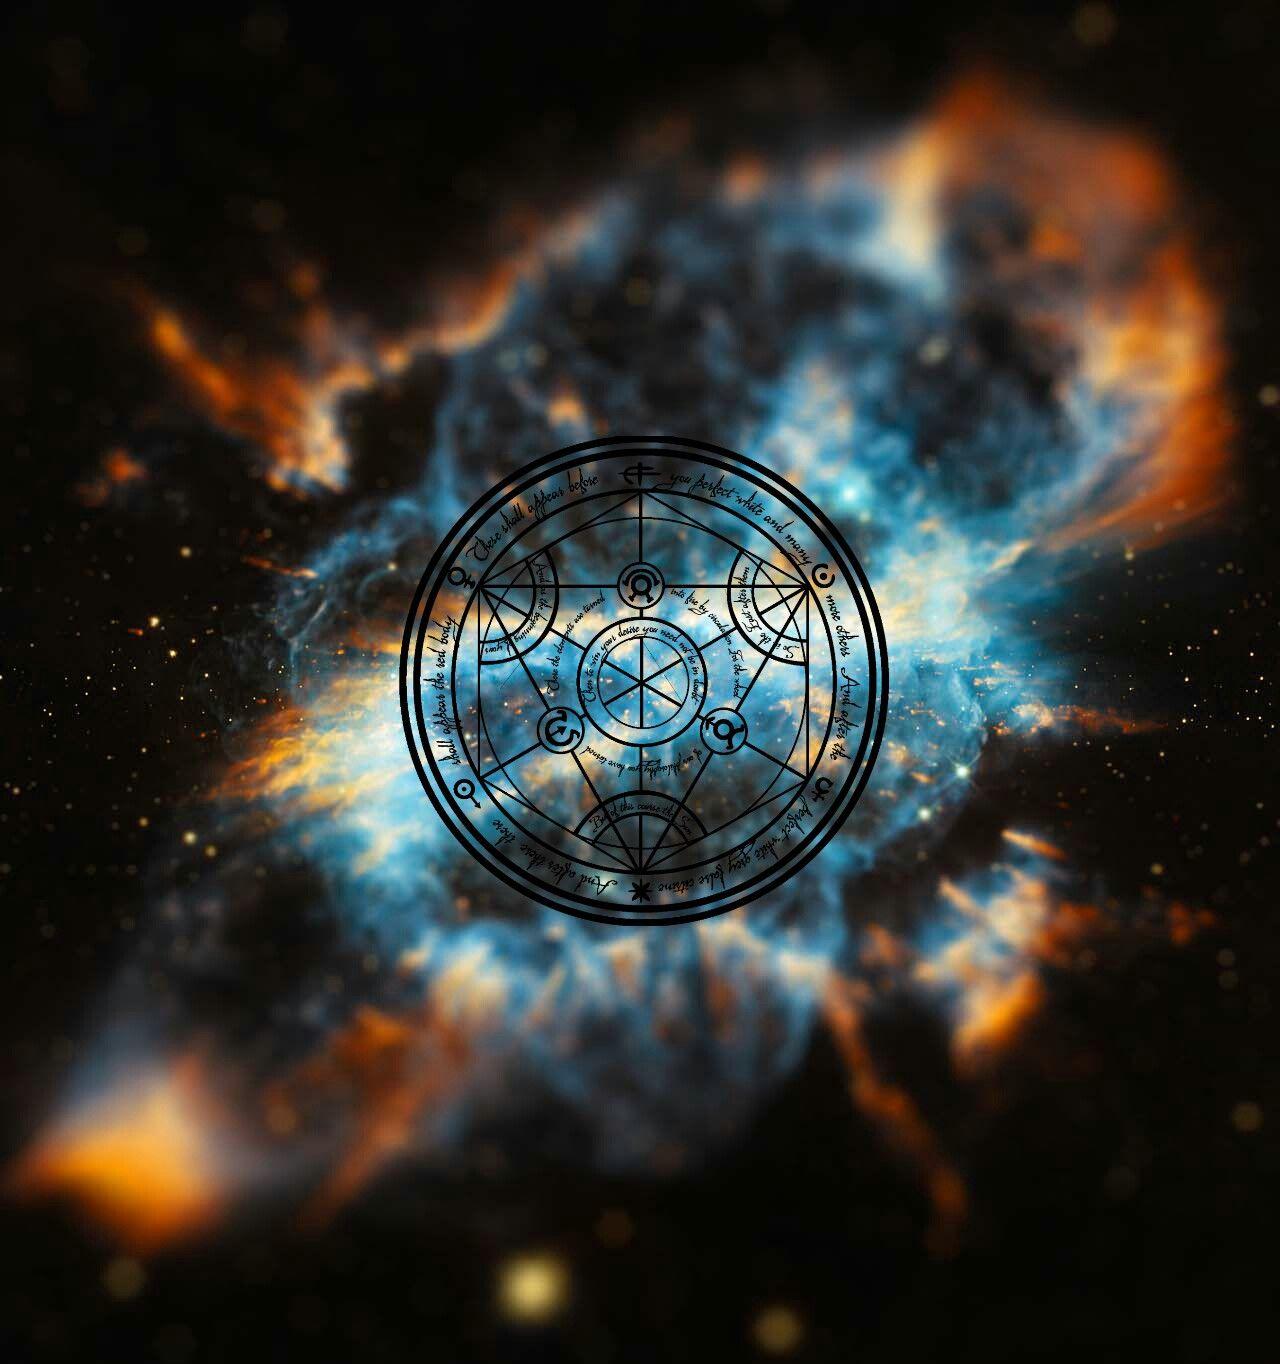 Took A Tilt Shifted Galaxy And Put A Transmutation Circle In It